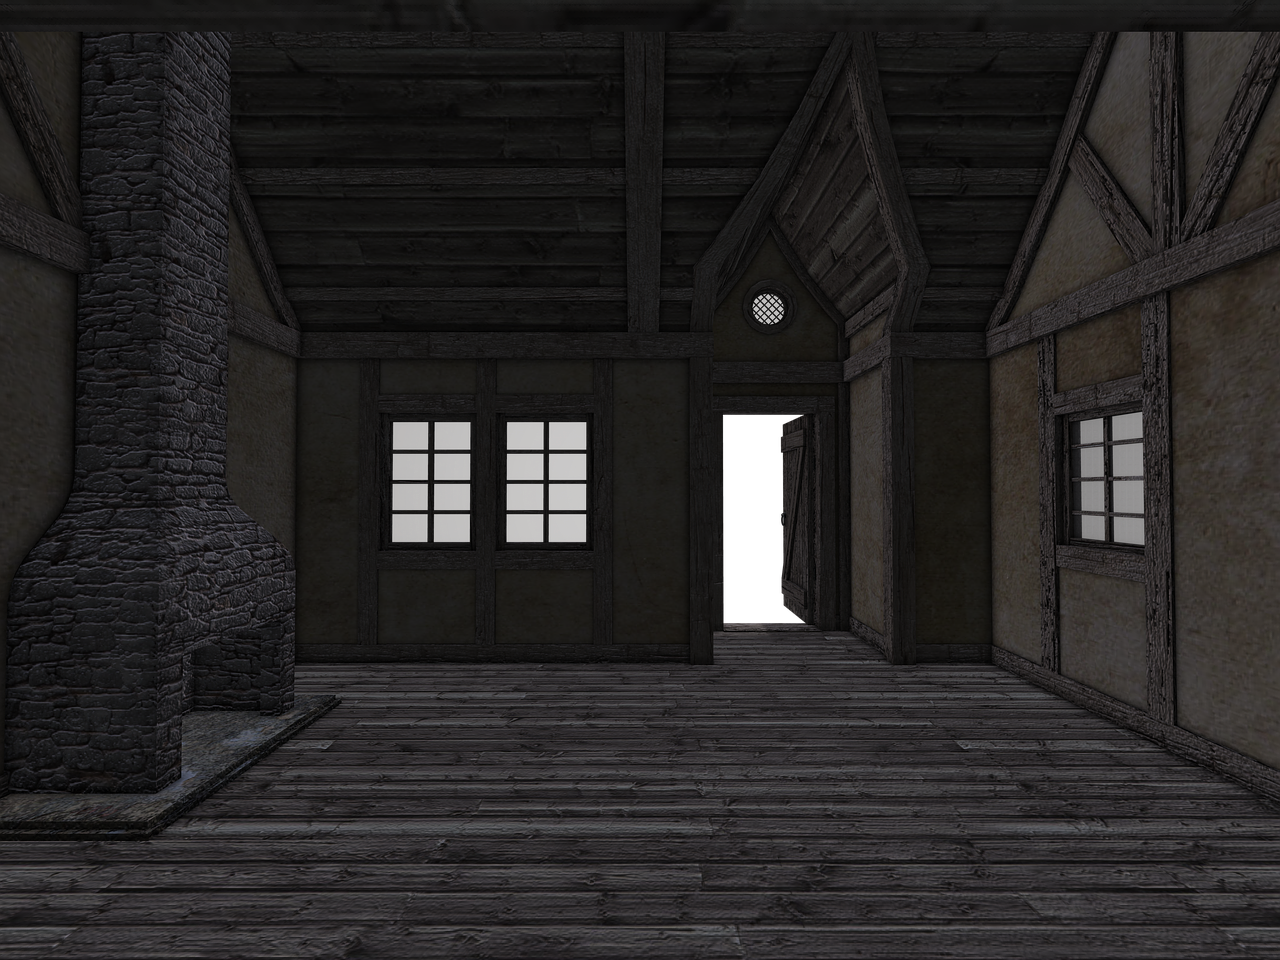 a room with a fireplace in the middle of it, an ambient occlusion render, digital art, medieval cottage interior, dark alley, wooden house, 3rd person view